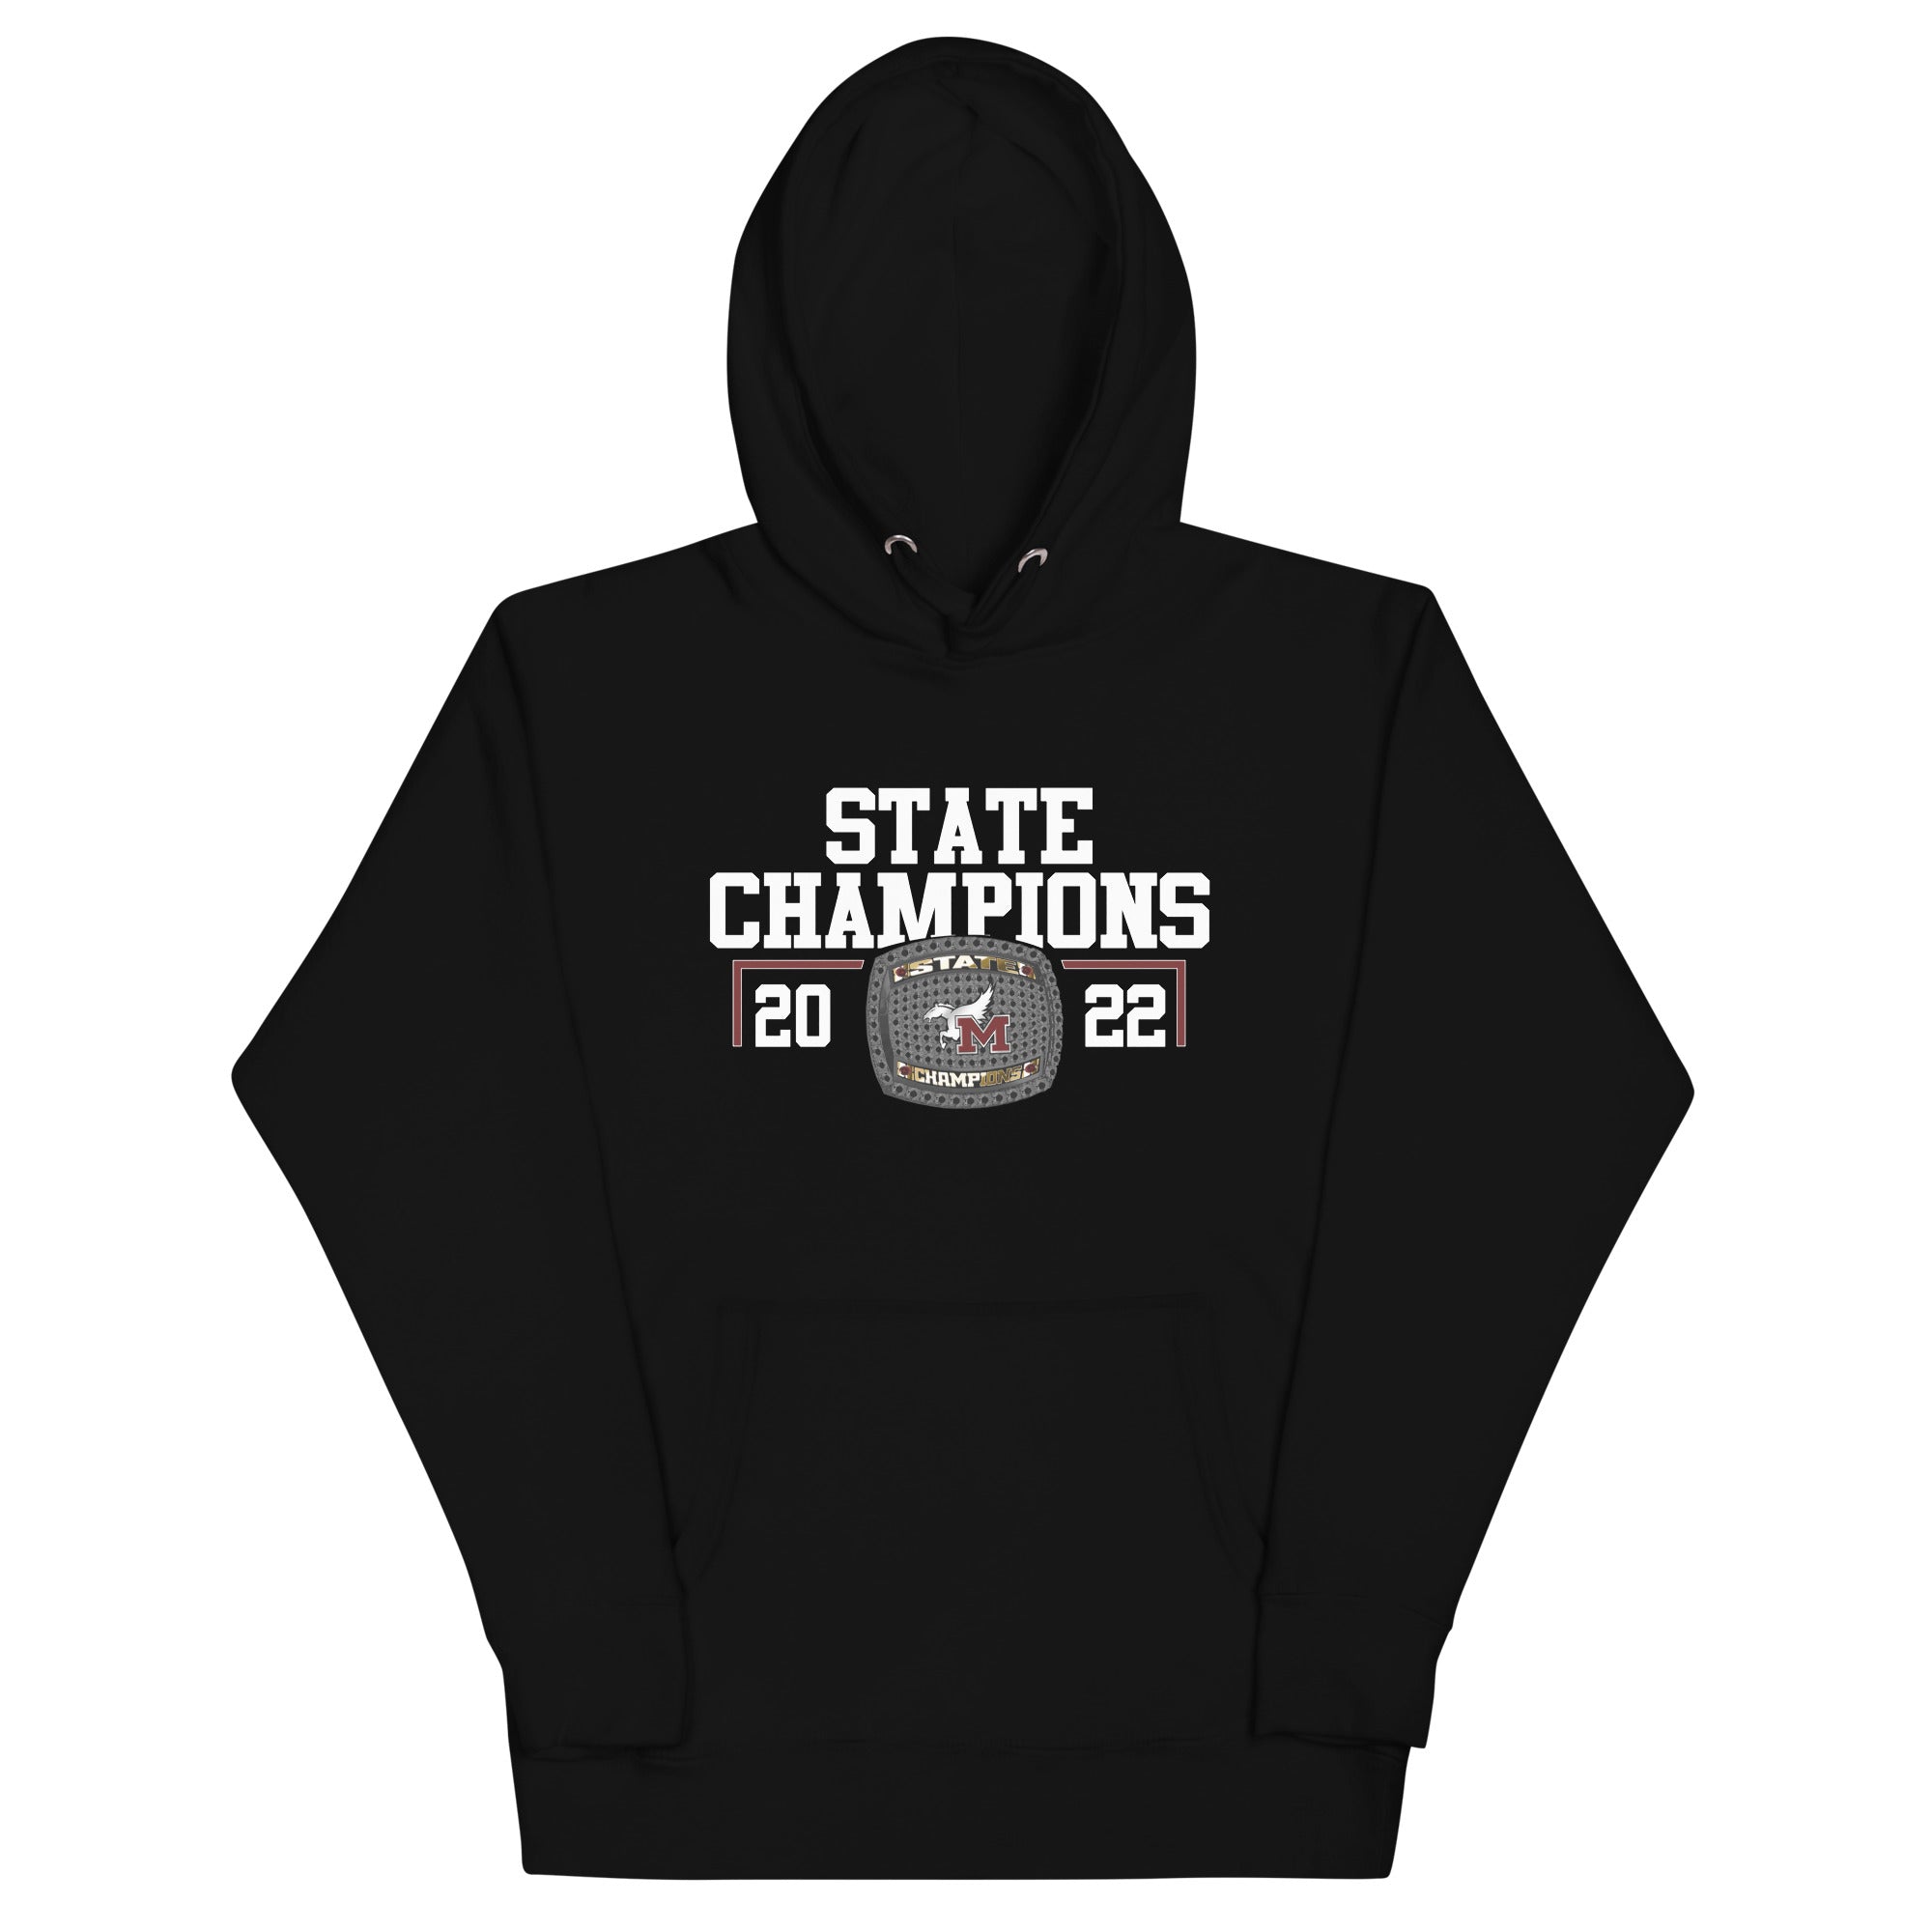 Maryvale Bowling State Champions Unisex Hoodie